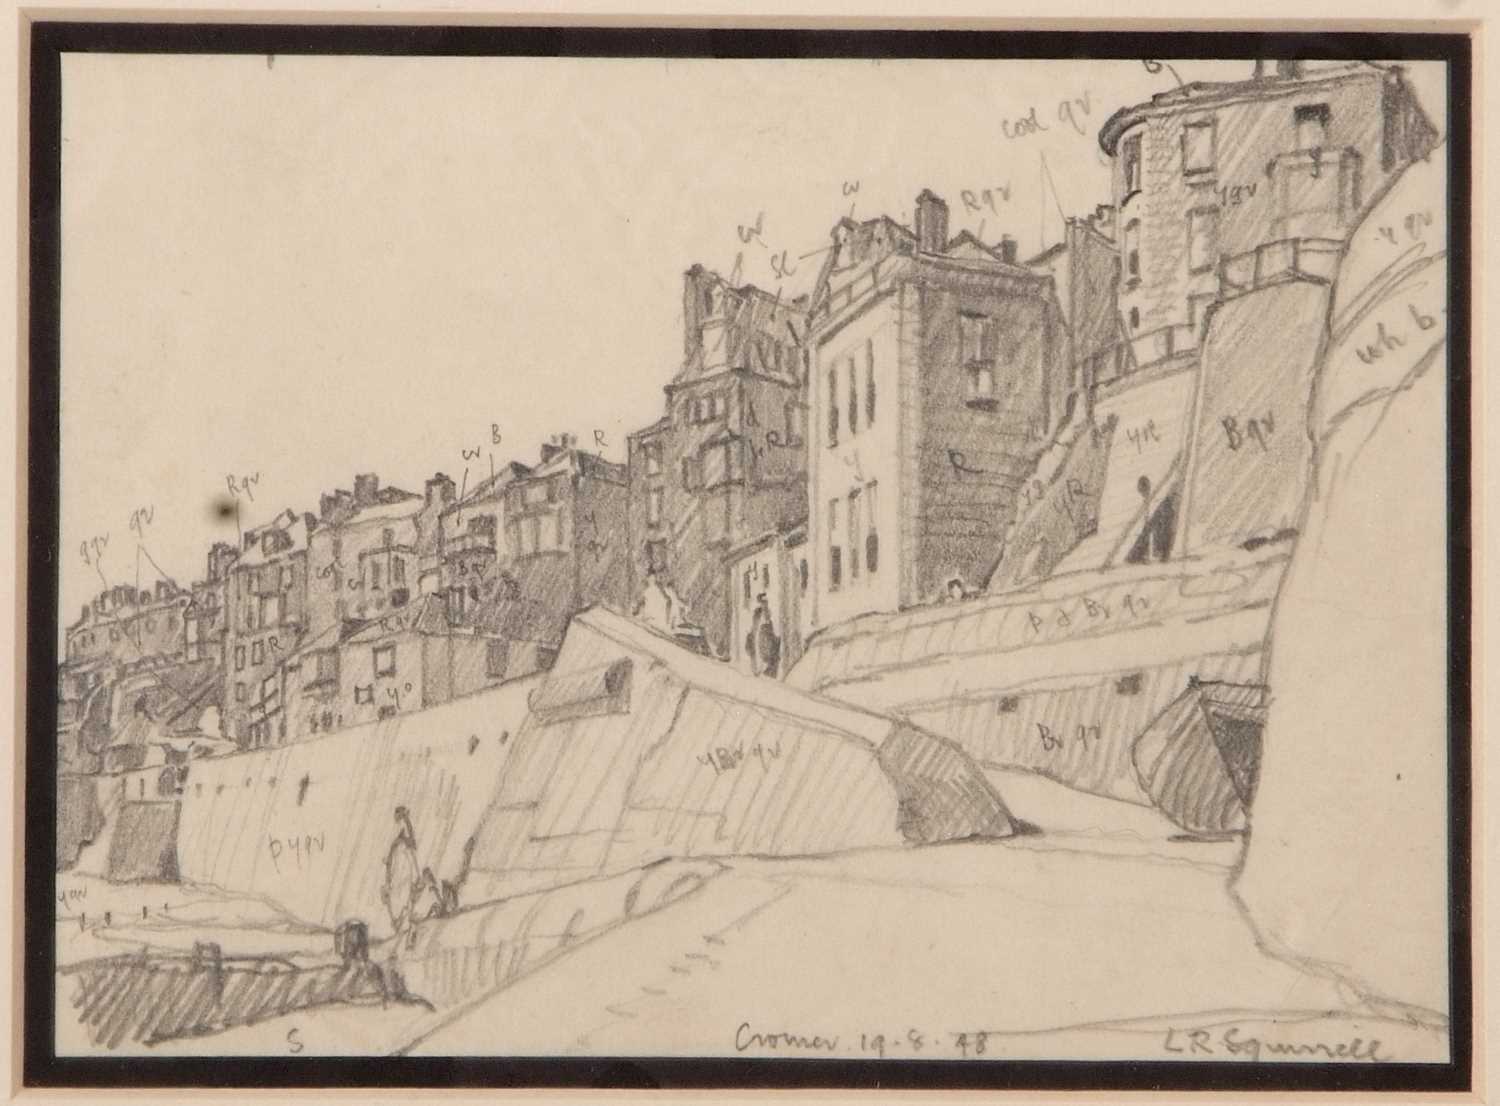 Leonard Russell Squirrell RWS RI RE (British, 1893-1979), 'Cromer 19.8.48', pencil on paper, signed, - Image 2 of 2